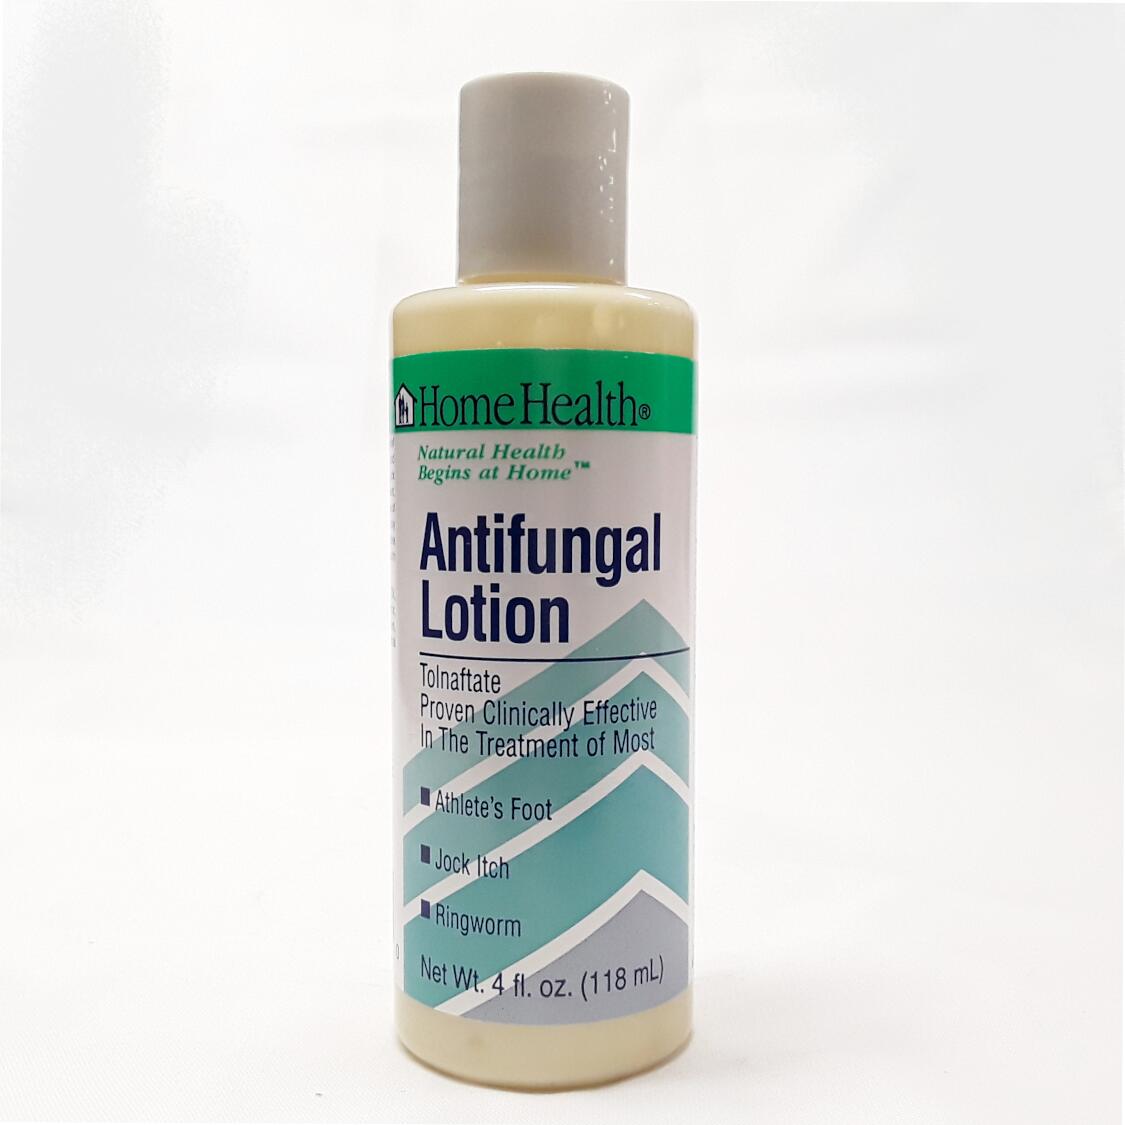 Homehealth antifungal lotion website product image view 1